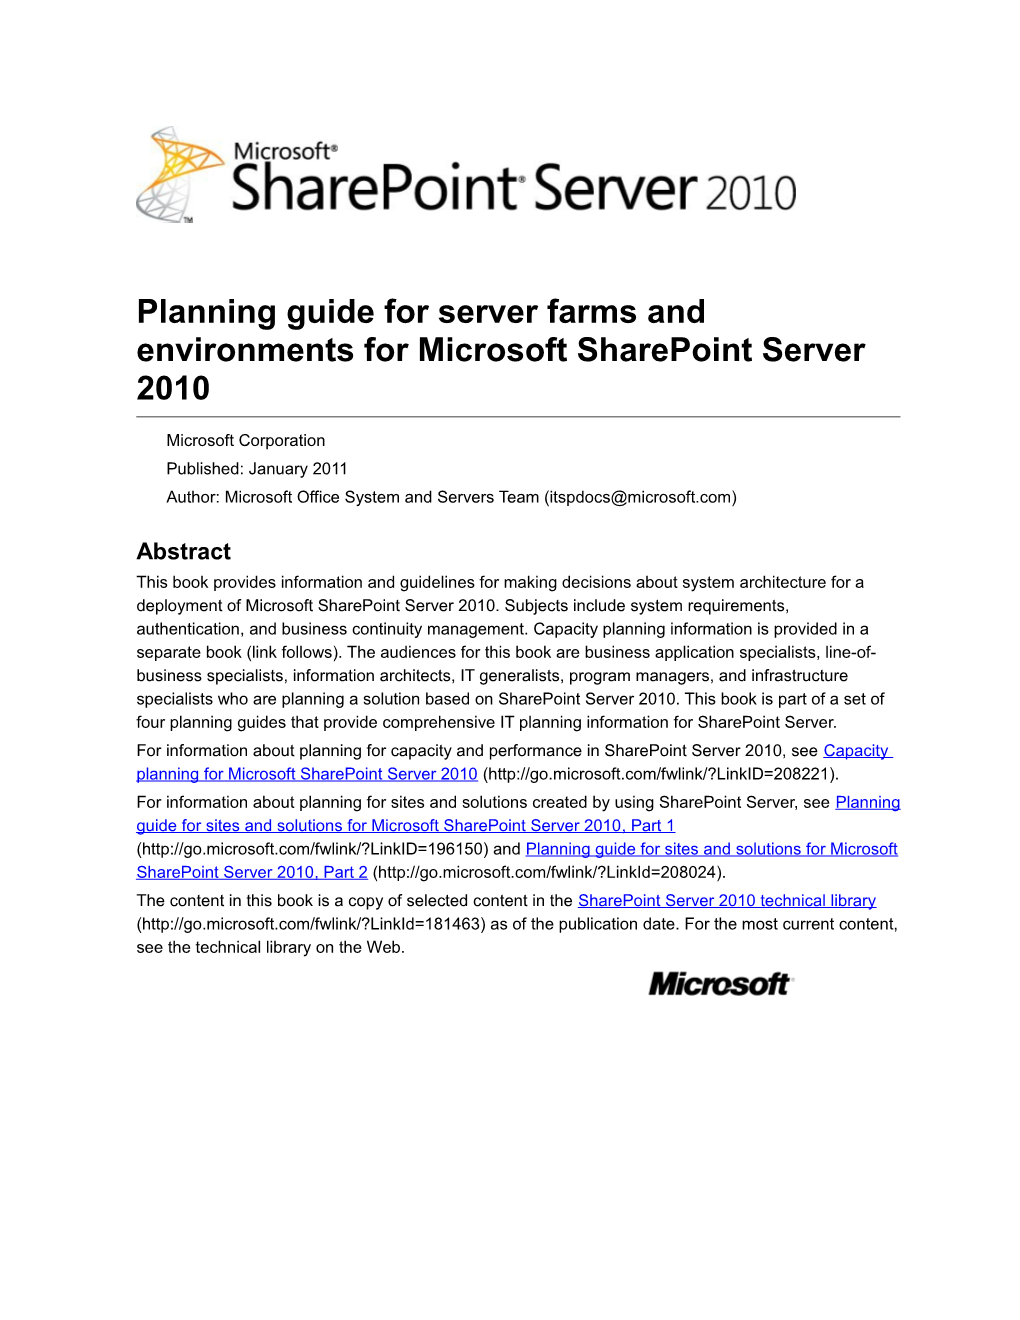 Planning Guide for Server Farms and Environments for Microsoft Sharepoint Server 2010